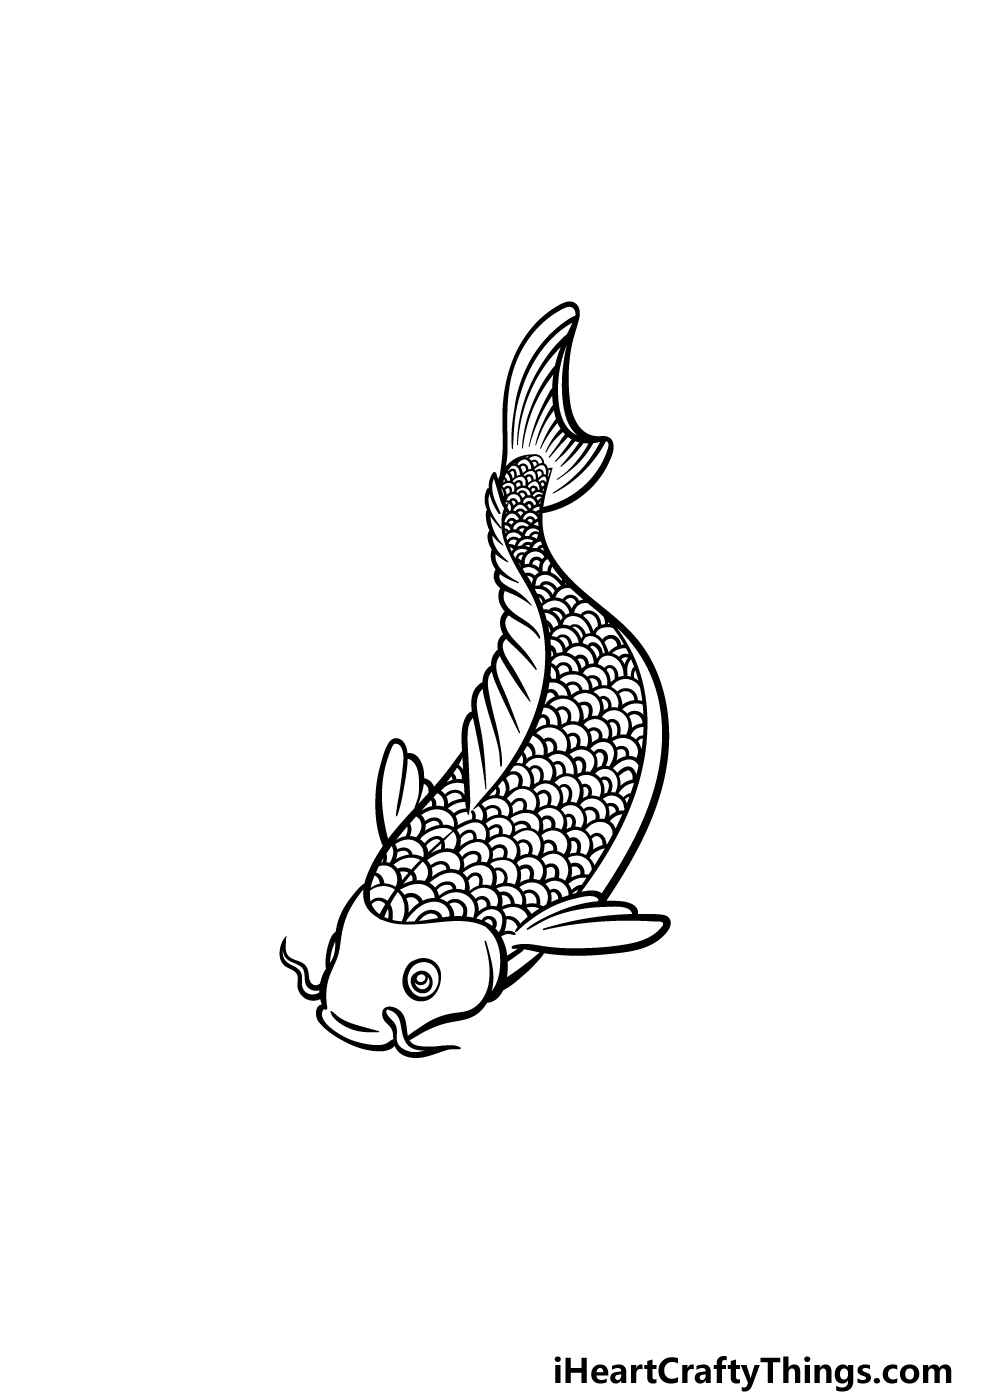 How to Draw a Fish - Easy Drawing Art-saigonsouth.com.vn